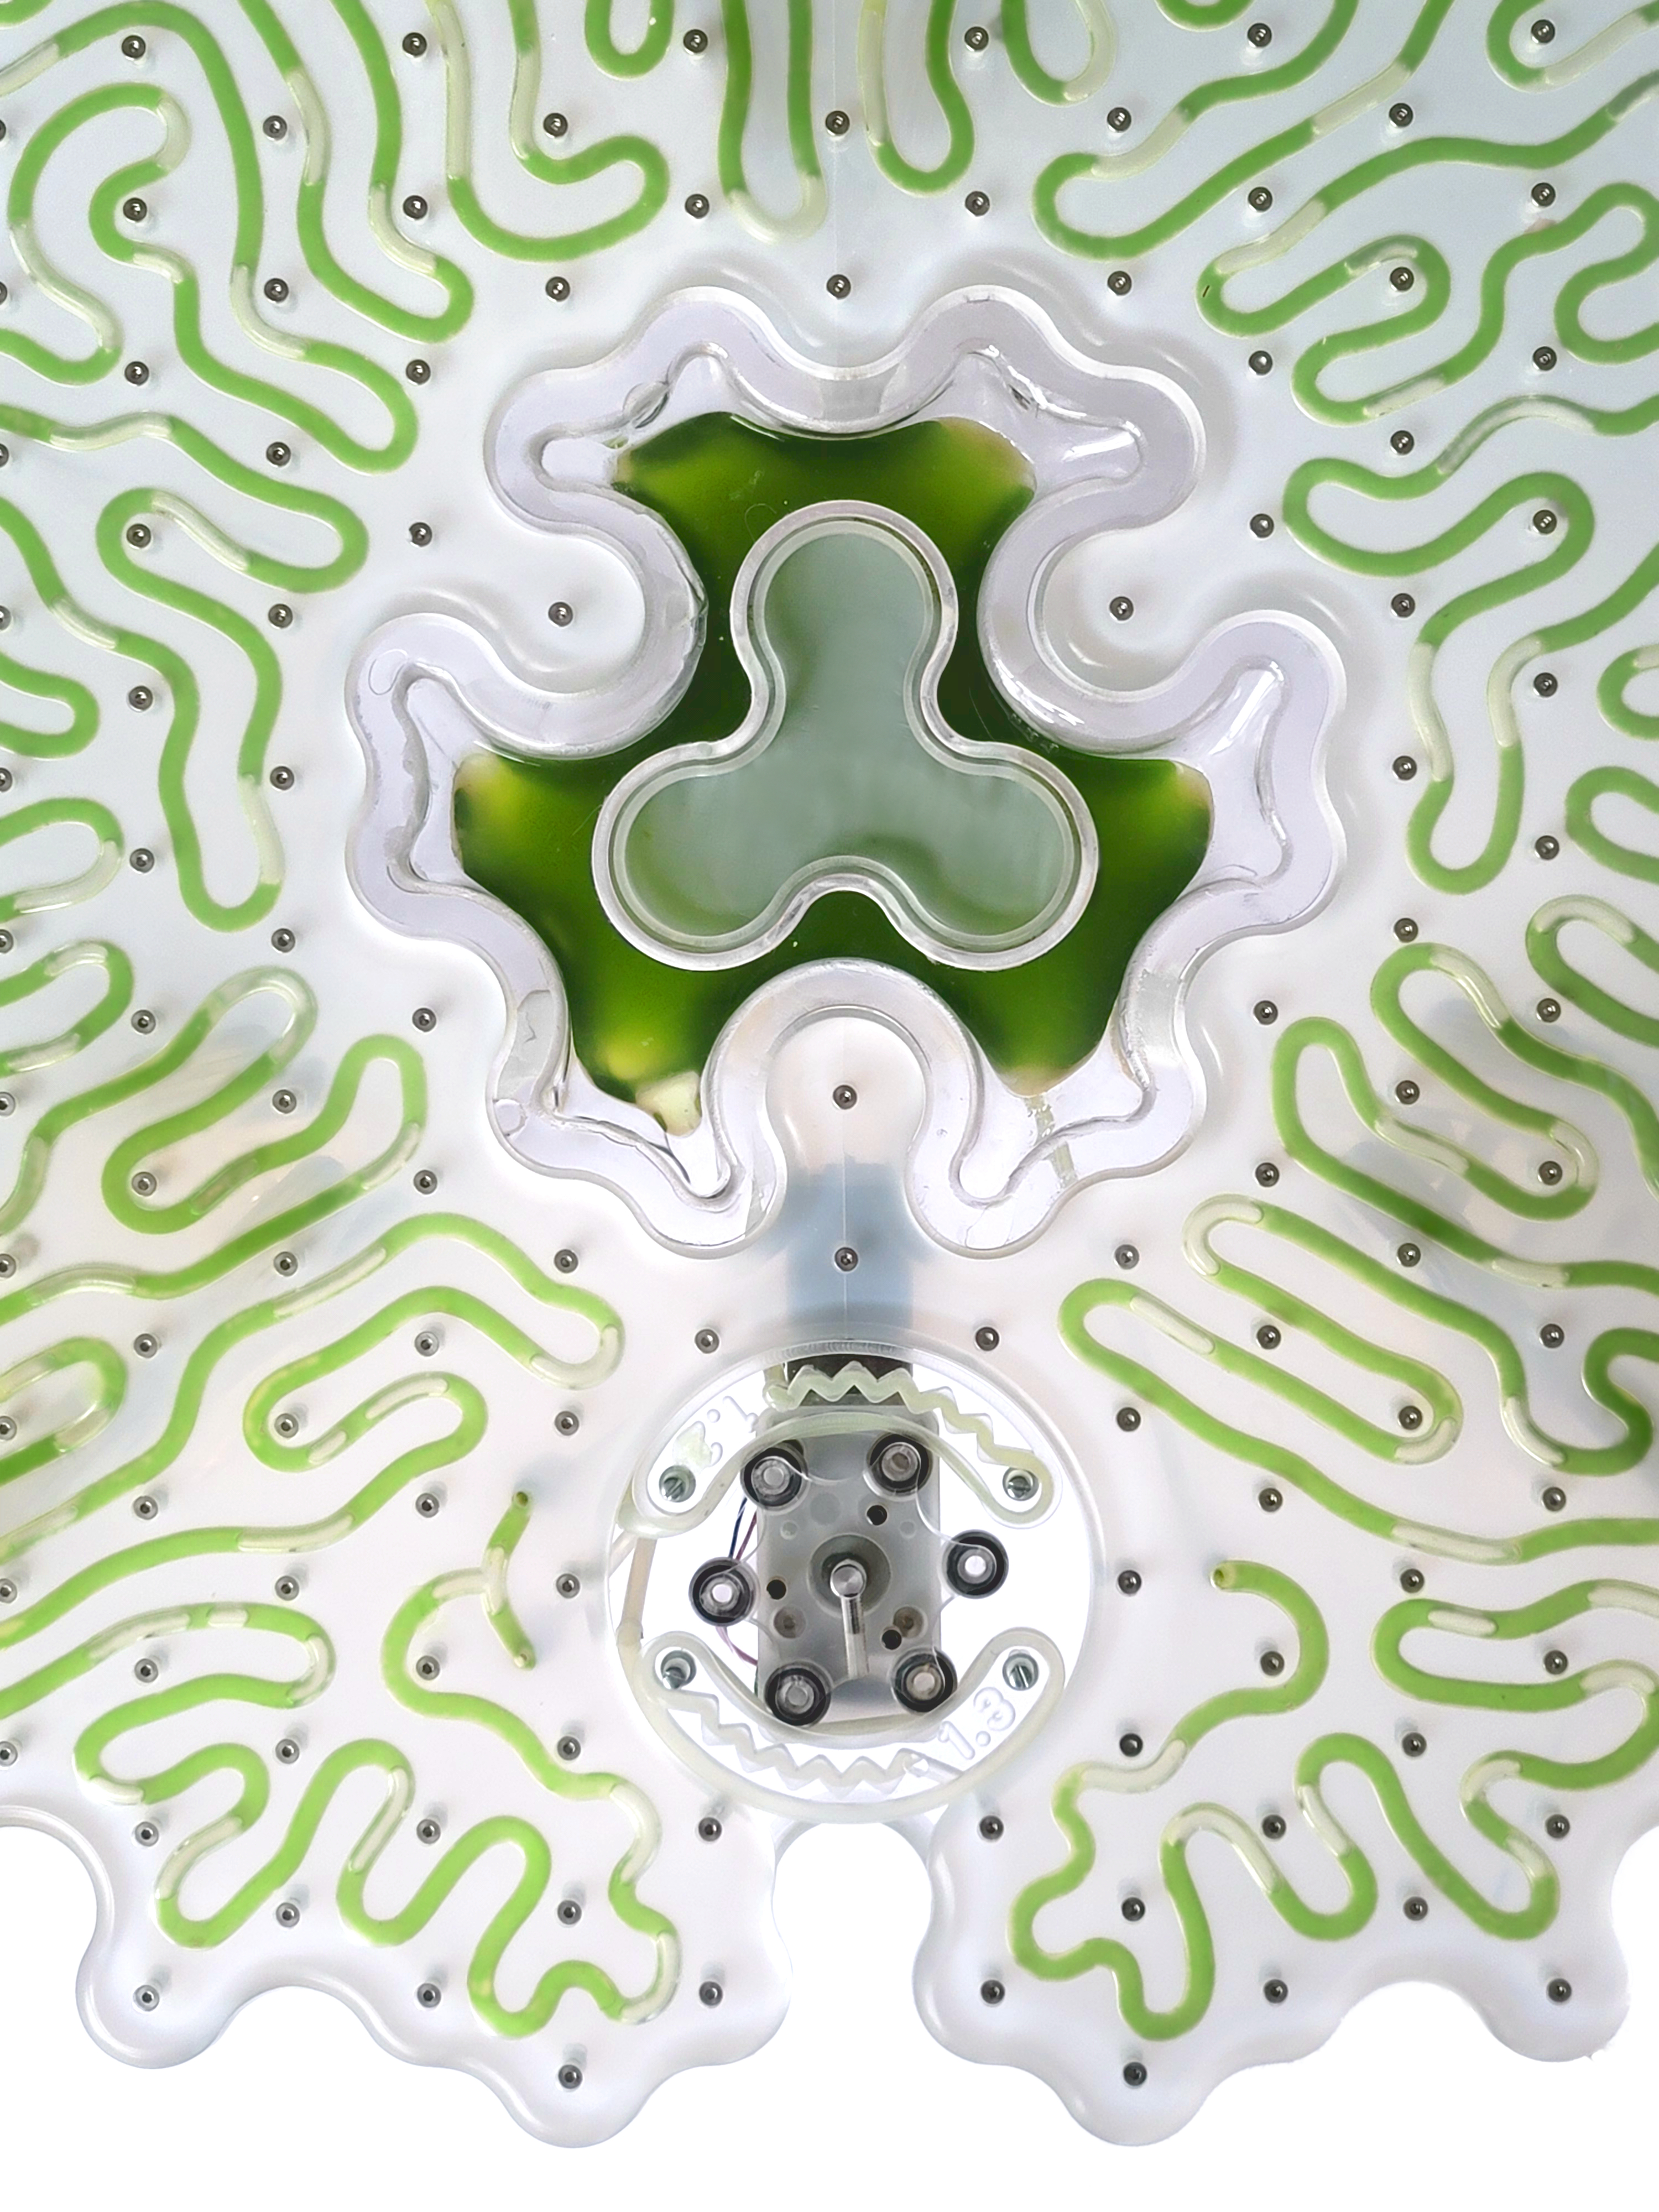 A close up of a white and green panel with shapes and patterns